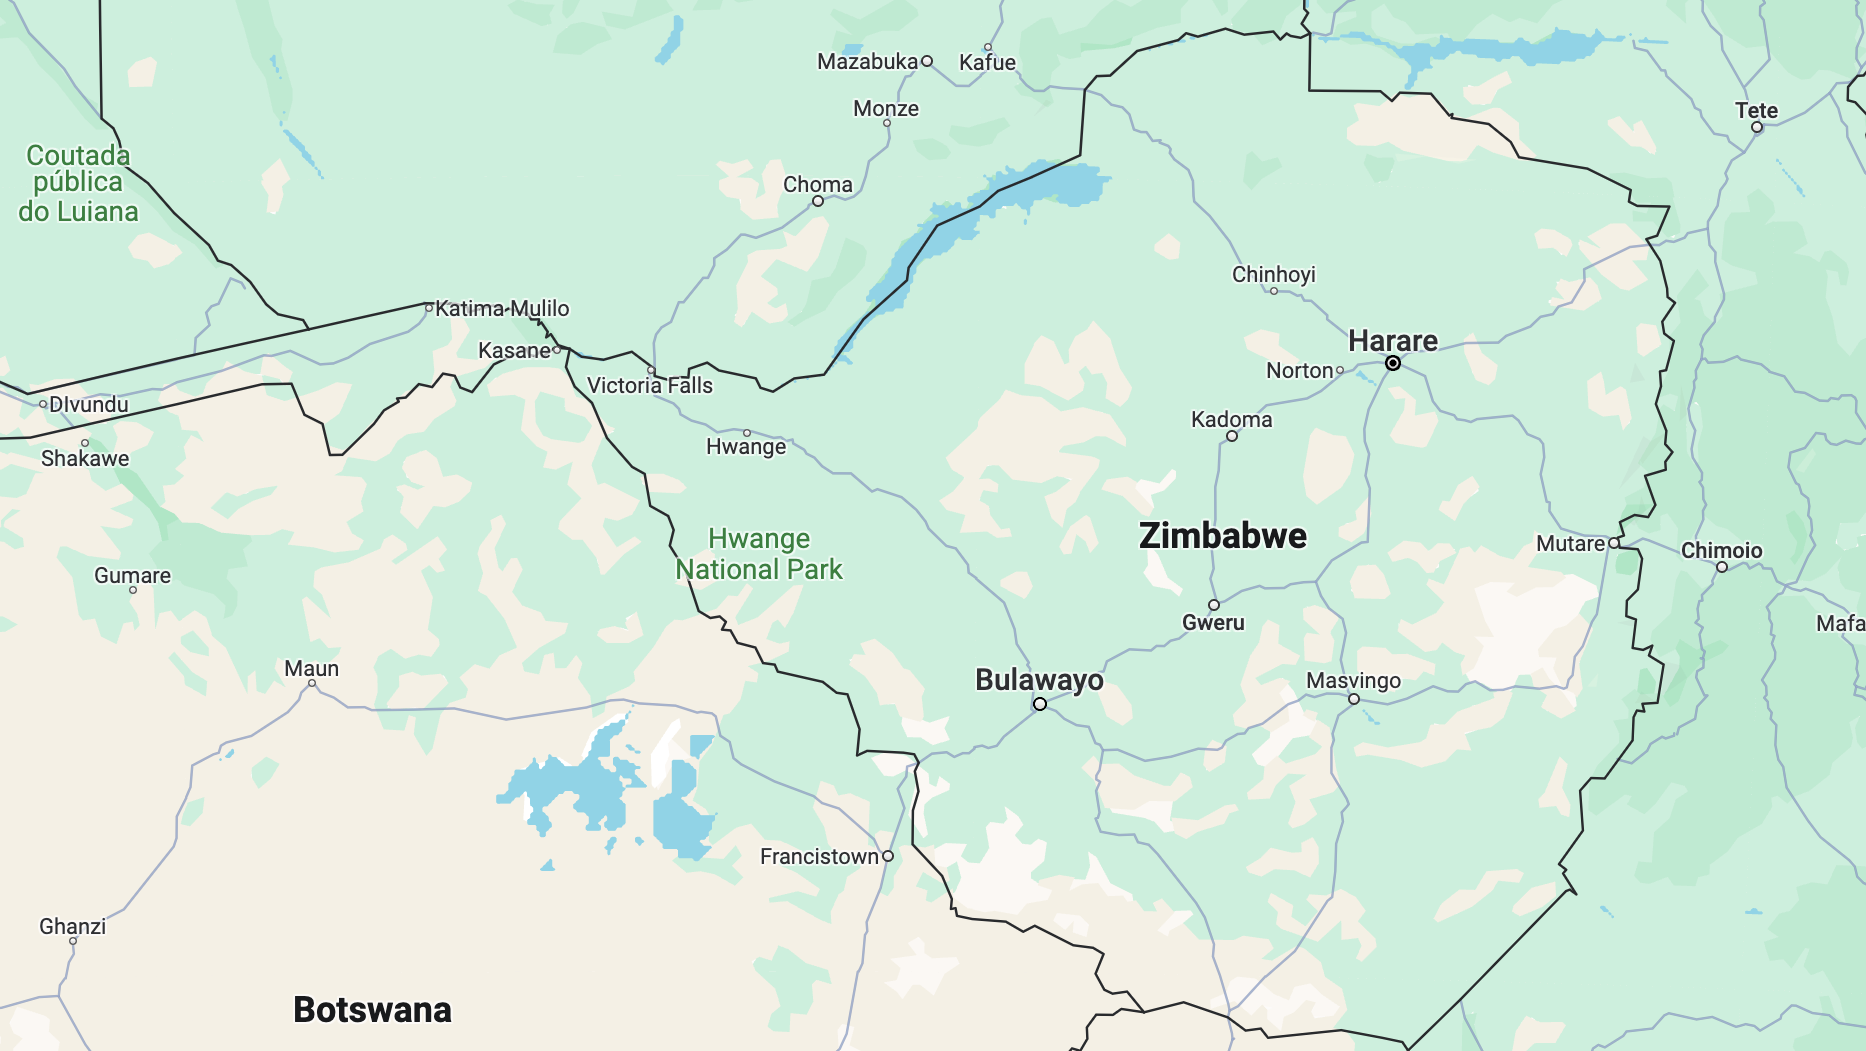 How to make a Zimbabwean elections map